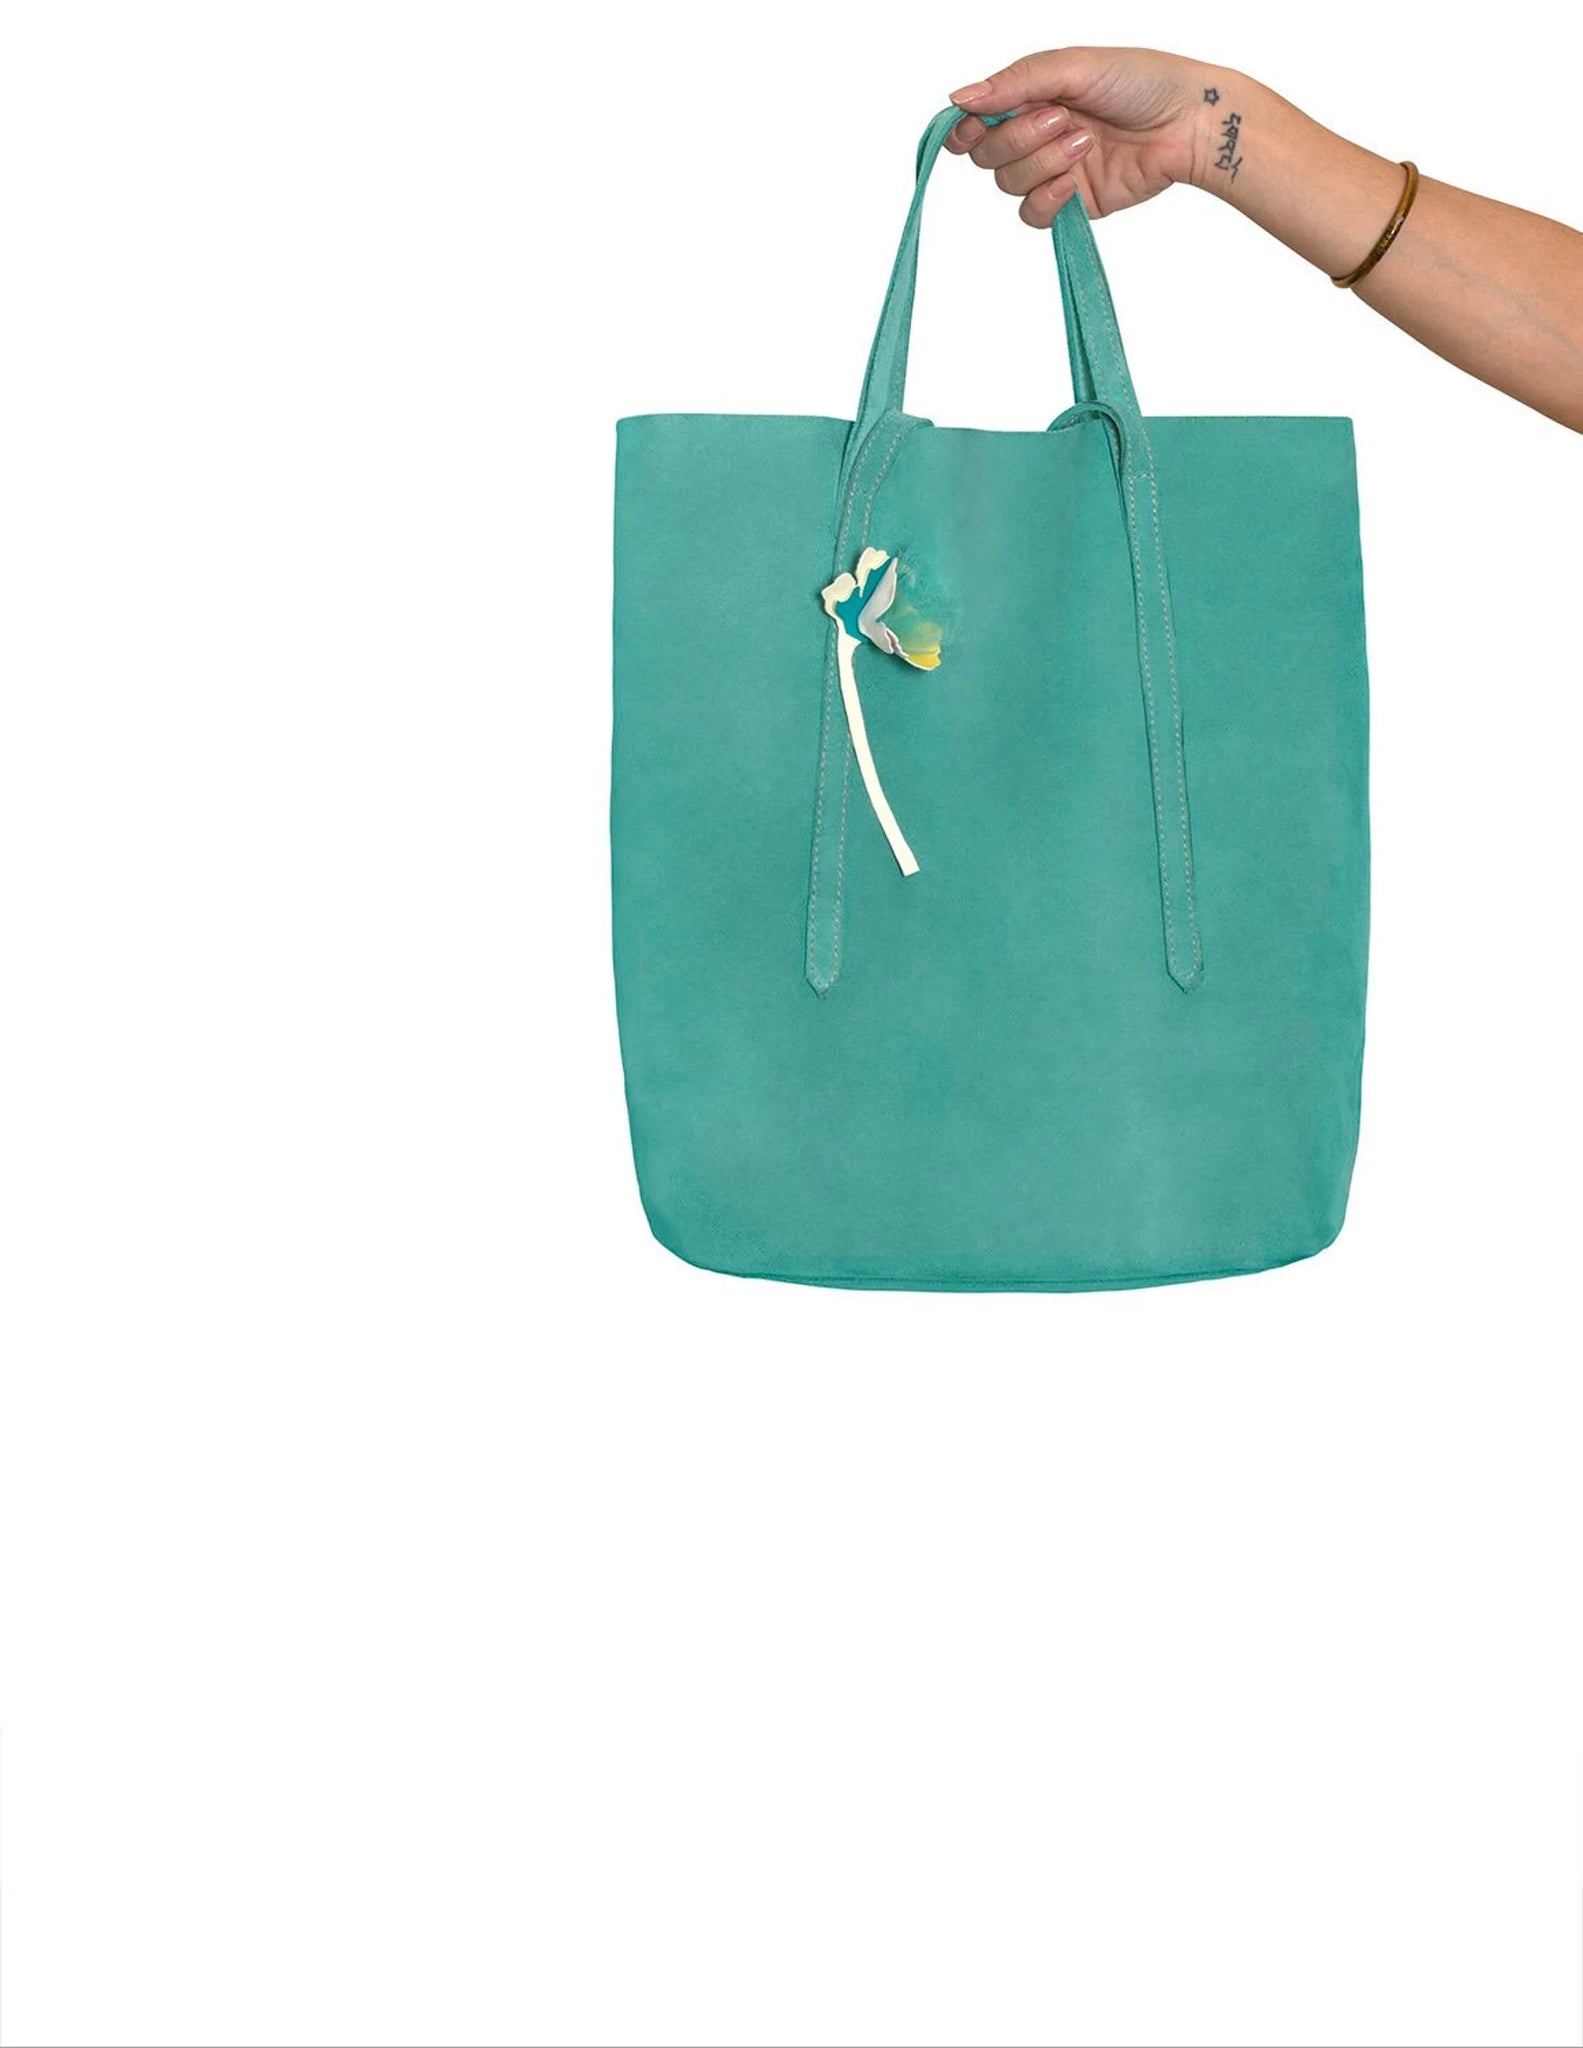 Mint suede leather tote bag